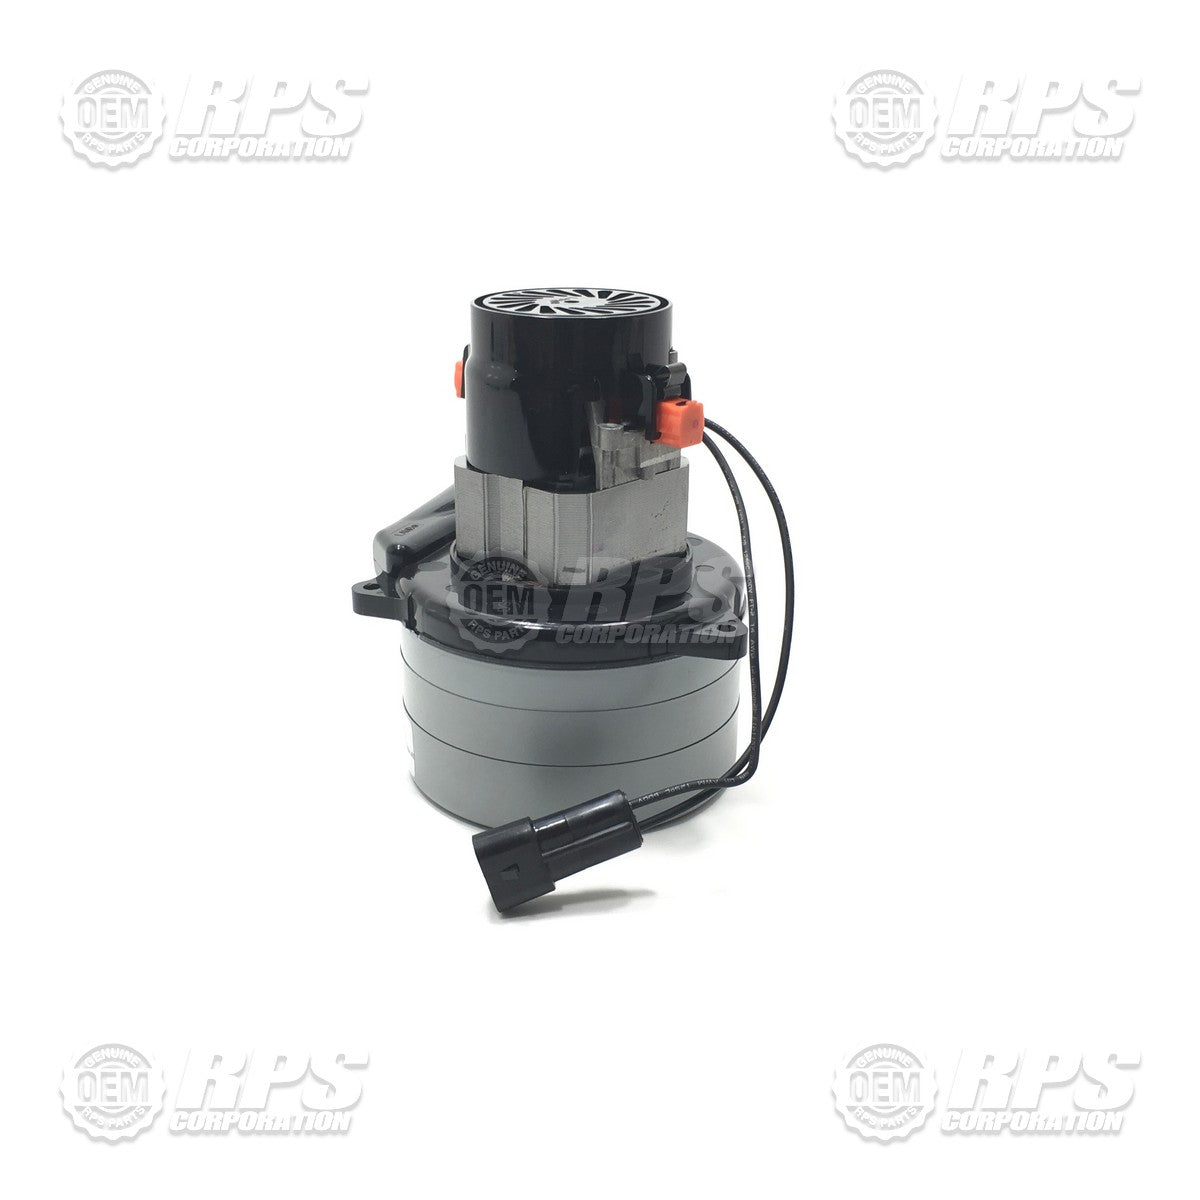 FactoryCat/Tomcat 175-5250, Motor,Vacuum, 24V, 3 Stage with Connector